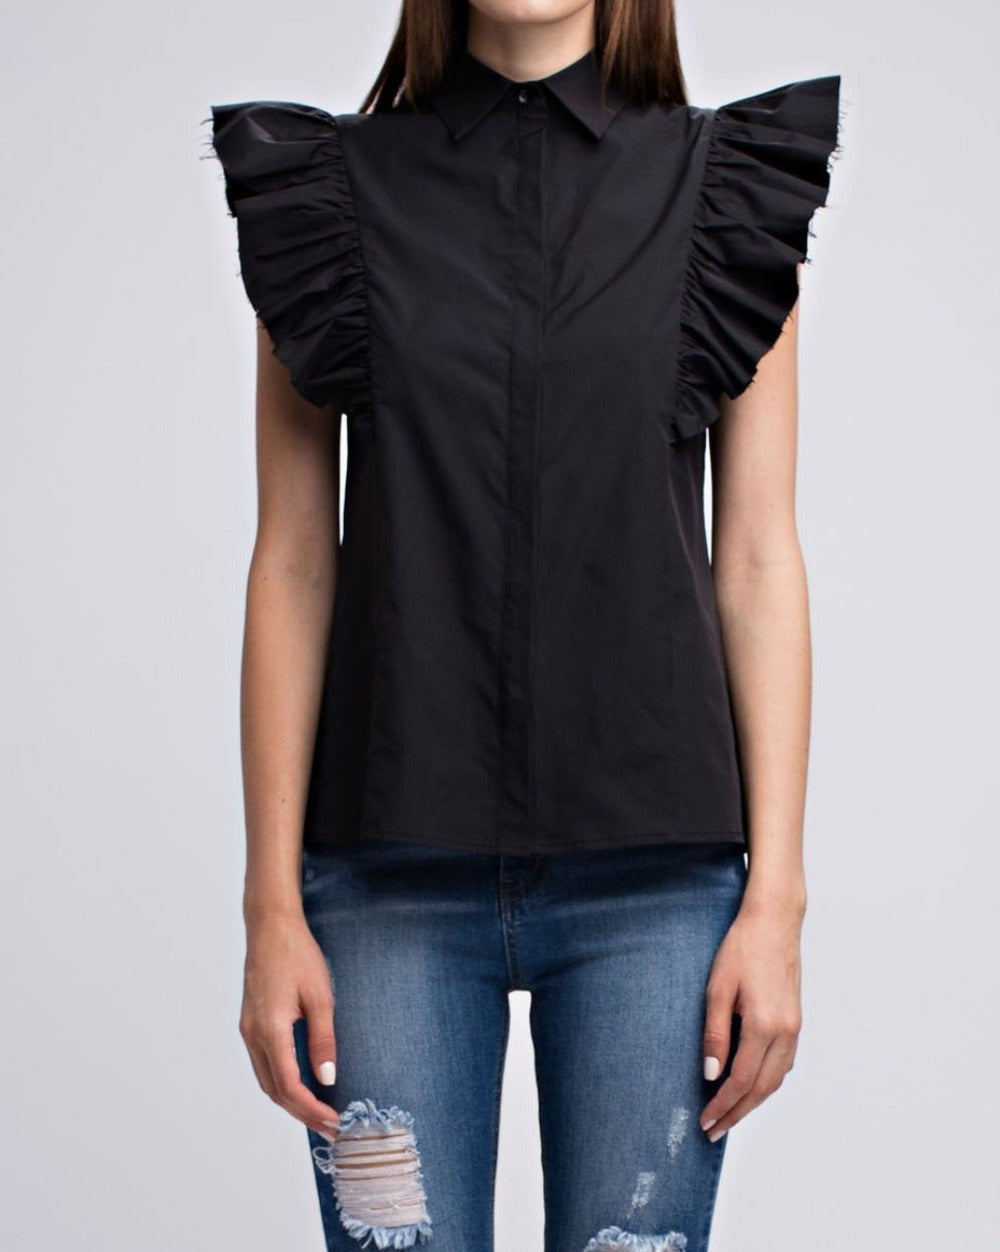 Kruella black button down shirt with structured exaggerated pleated short sleeves - Sahvant